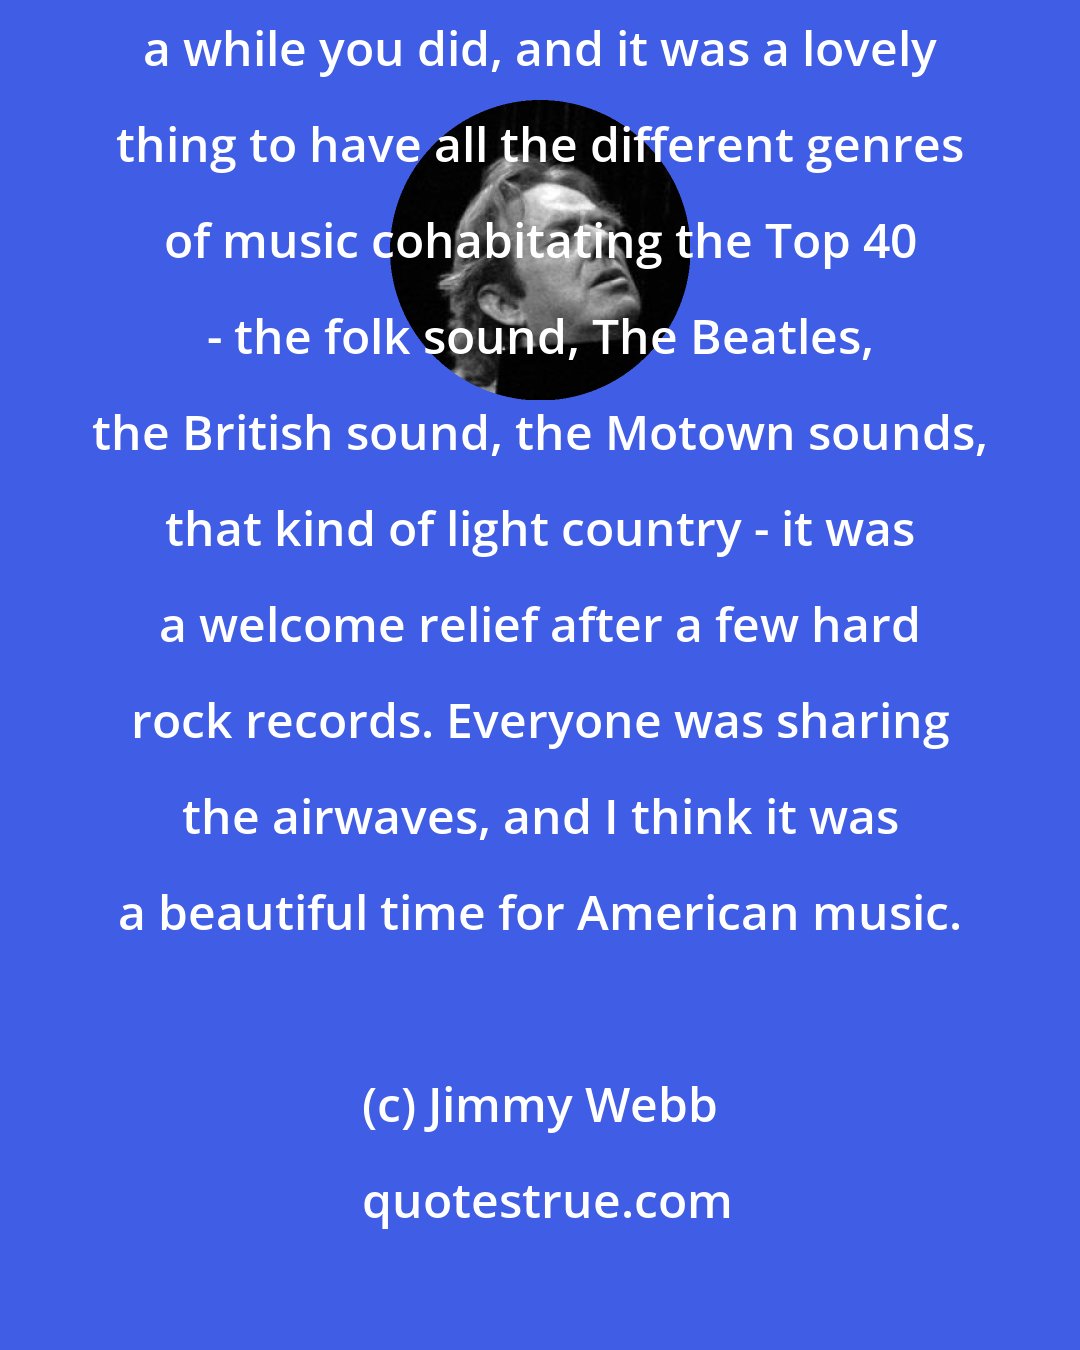 Jimmy Webb: You certainly don't hear any country music on pop radio today. But for a while you did, and it was a lovely thing to have all the different genres of music cohabitating the Top 40 - the folk sound, The Beatles, the British sound, the Motown sounds, that kind of light country - it was a welcome relief after a few hard rock records. Everyone was sharing the airwaves, and I think it was a beautiful time for American music.